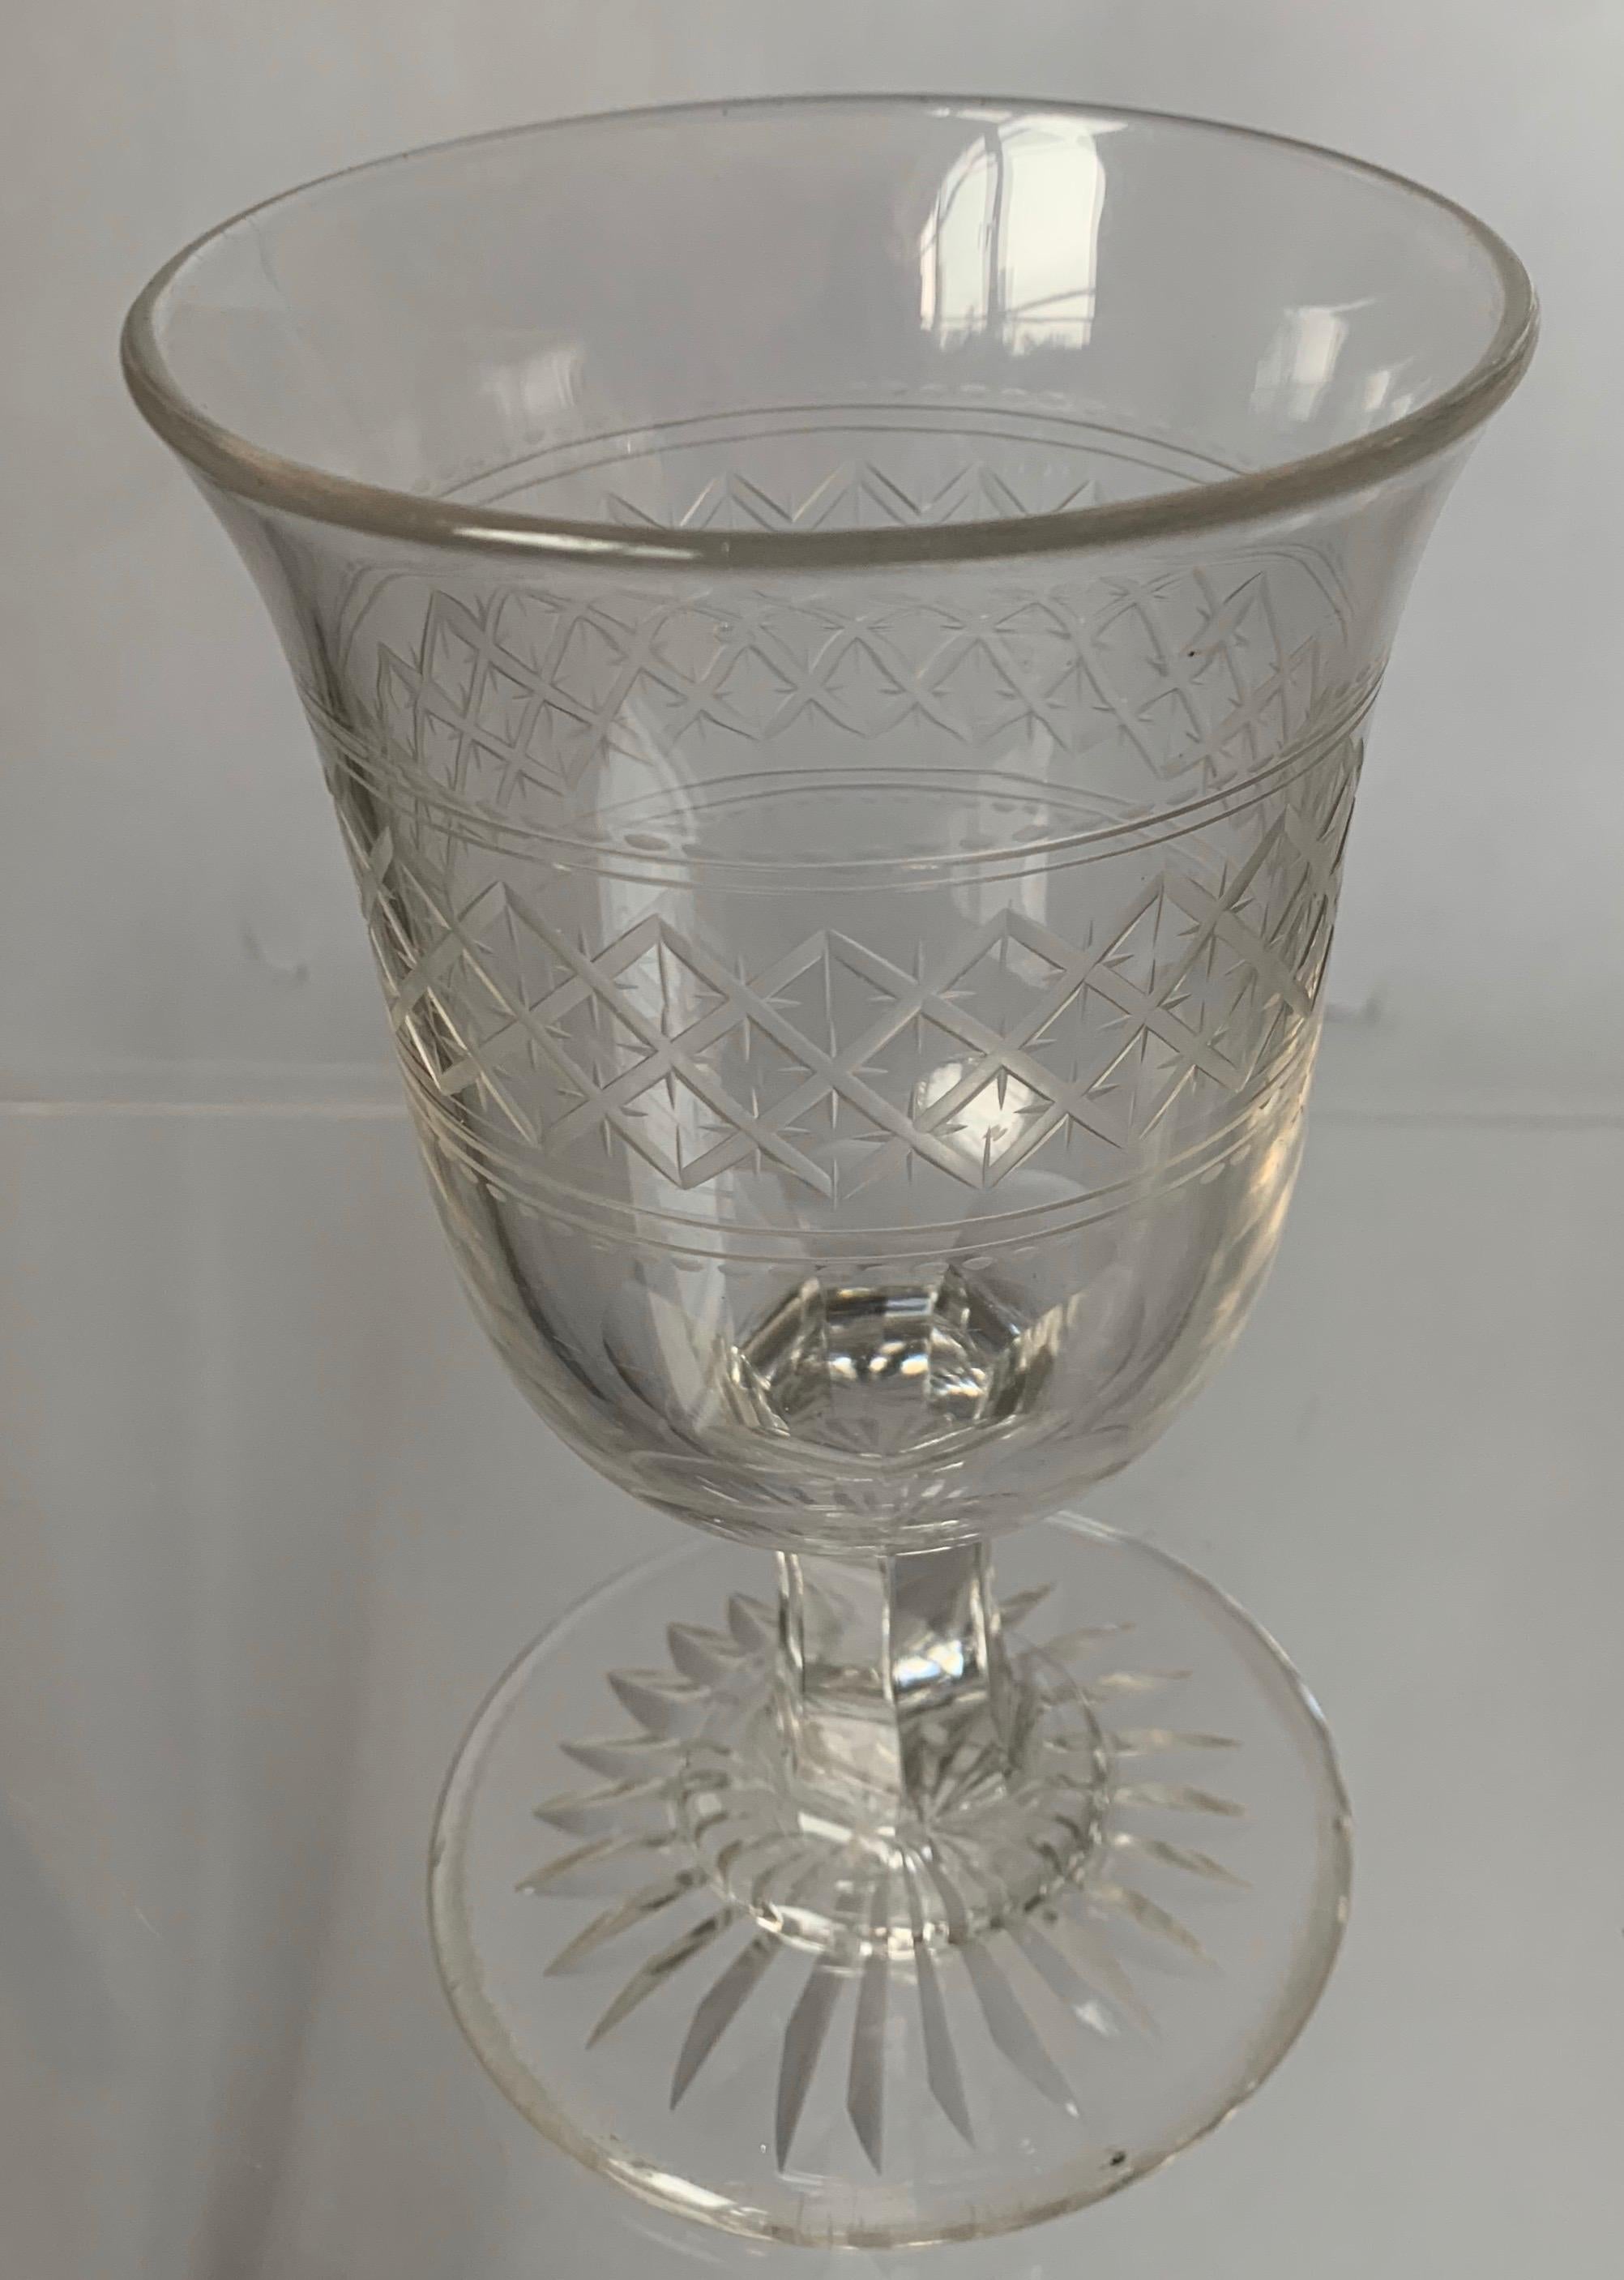 Cut glass chalice from England, circa 1840. Cut glass with no restoration.
Provenance: purchased from Taylor B. Williams Antiques. Chicago, Illinois.